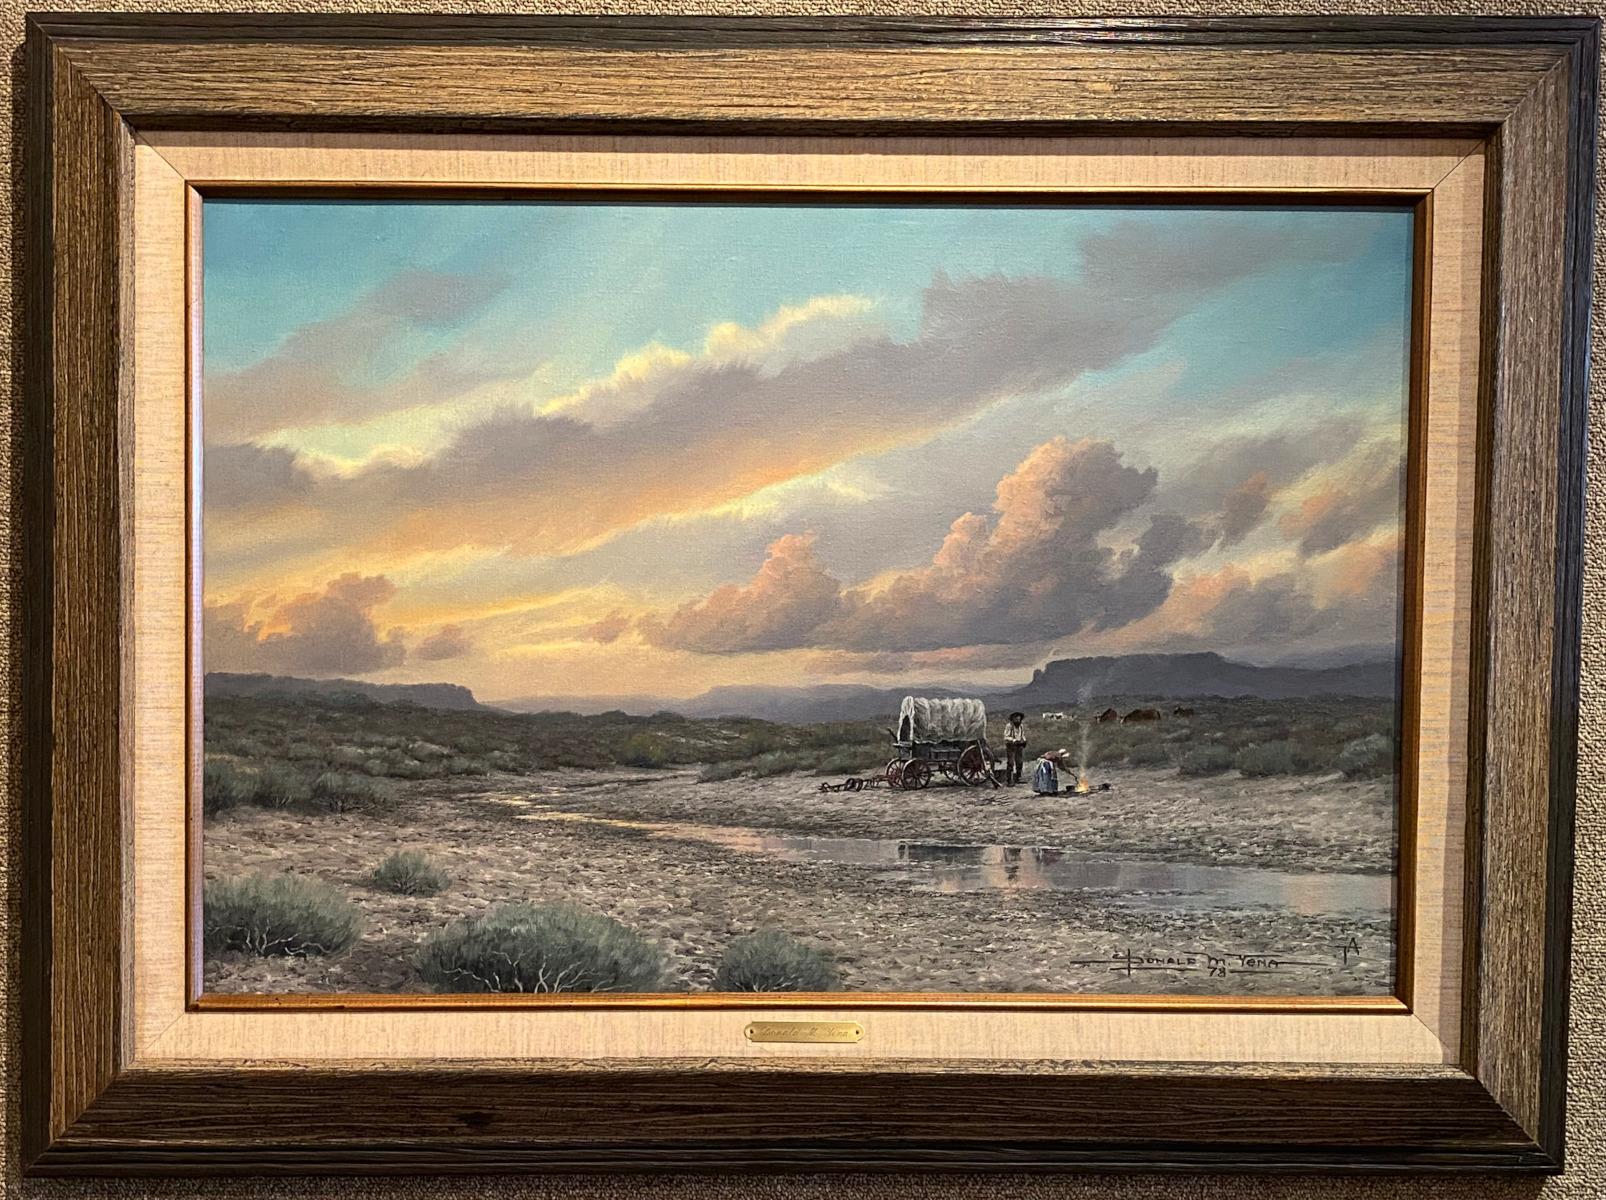 Donald Yena Landscape Painting - "EVENING OUT WEST"  WESTERN COWBOY RANCH CABIN EVENING CLOUDS COVERED WAGON